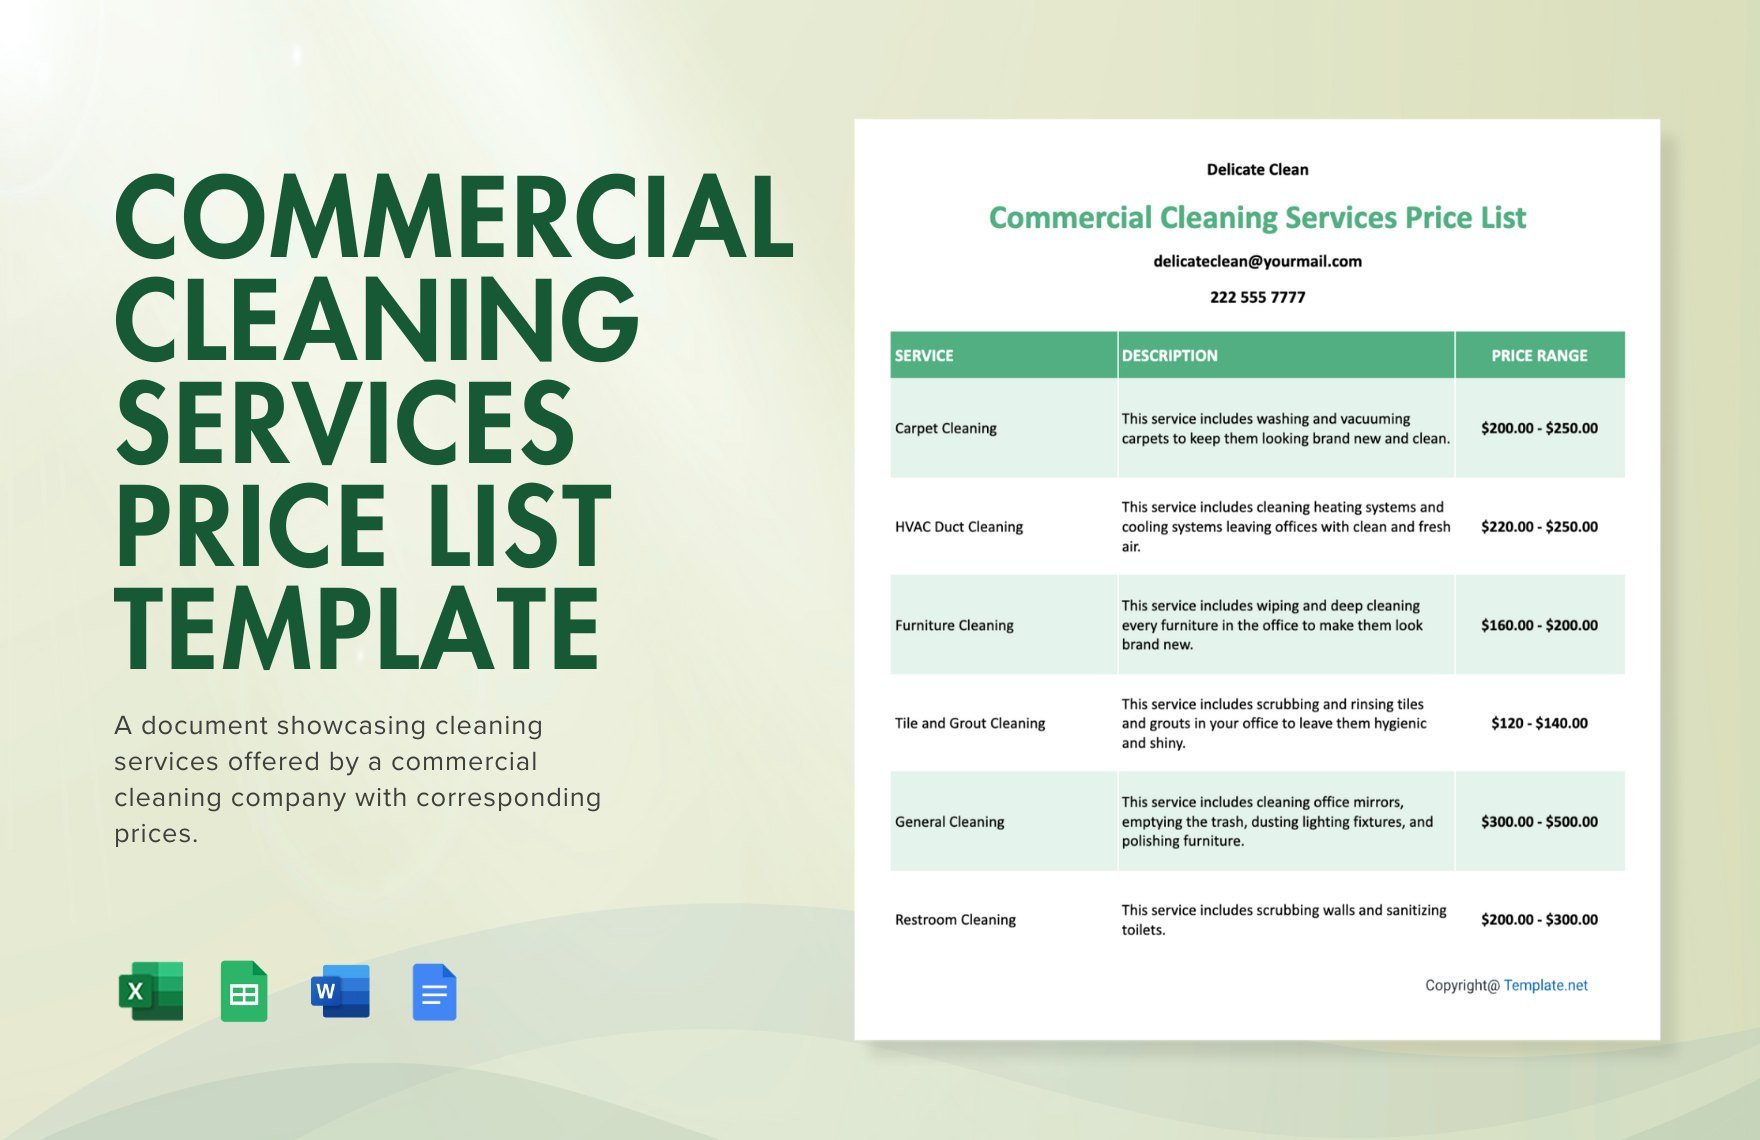 Commercial Cleaning Services Price List Template in Word, Google Docs, Excel, Google Sheets